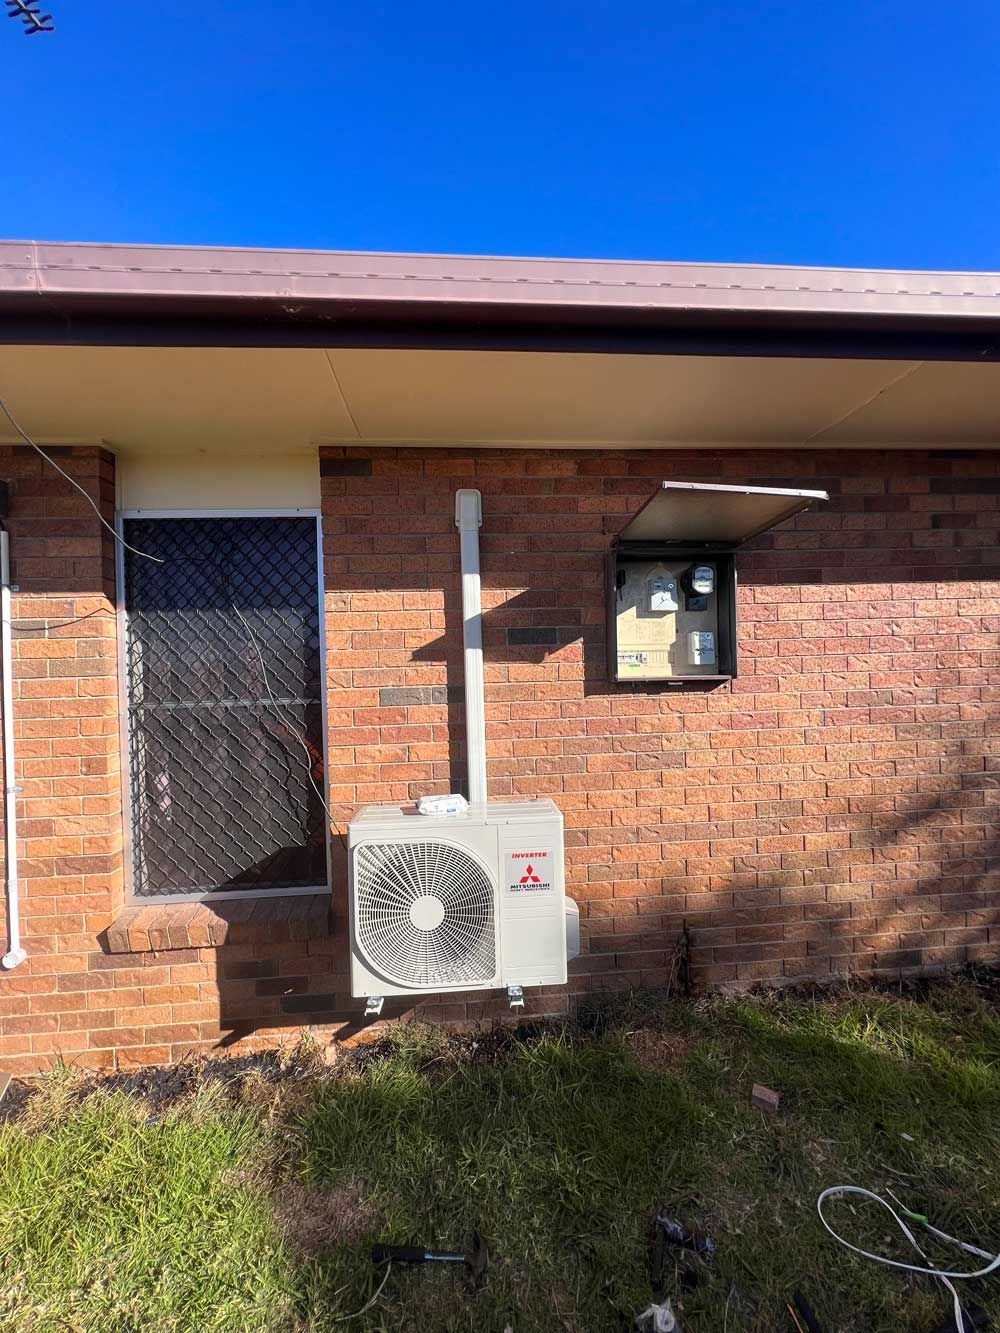 An Outdoor Compressor Hanging on the Brick Wall — Electrician in Armidale, NSW